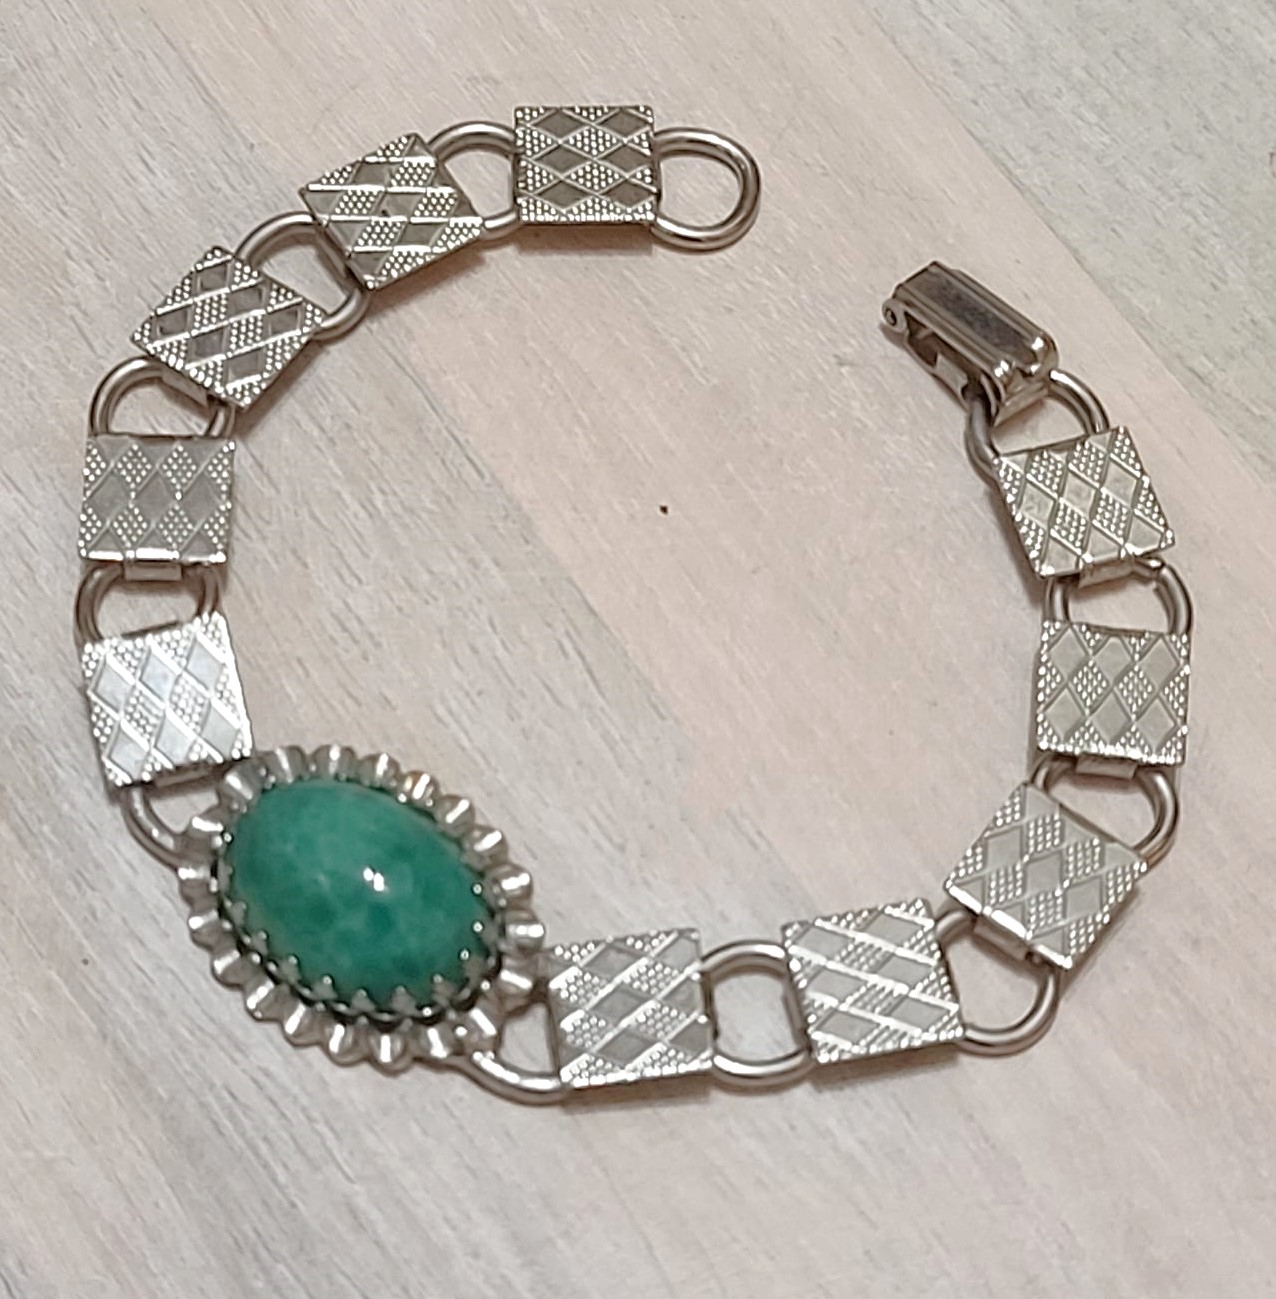 Vintage bracelet, green cabachon center, silvertone with etched detail on band